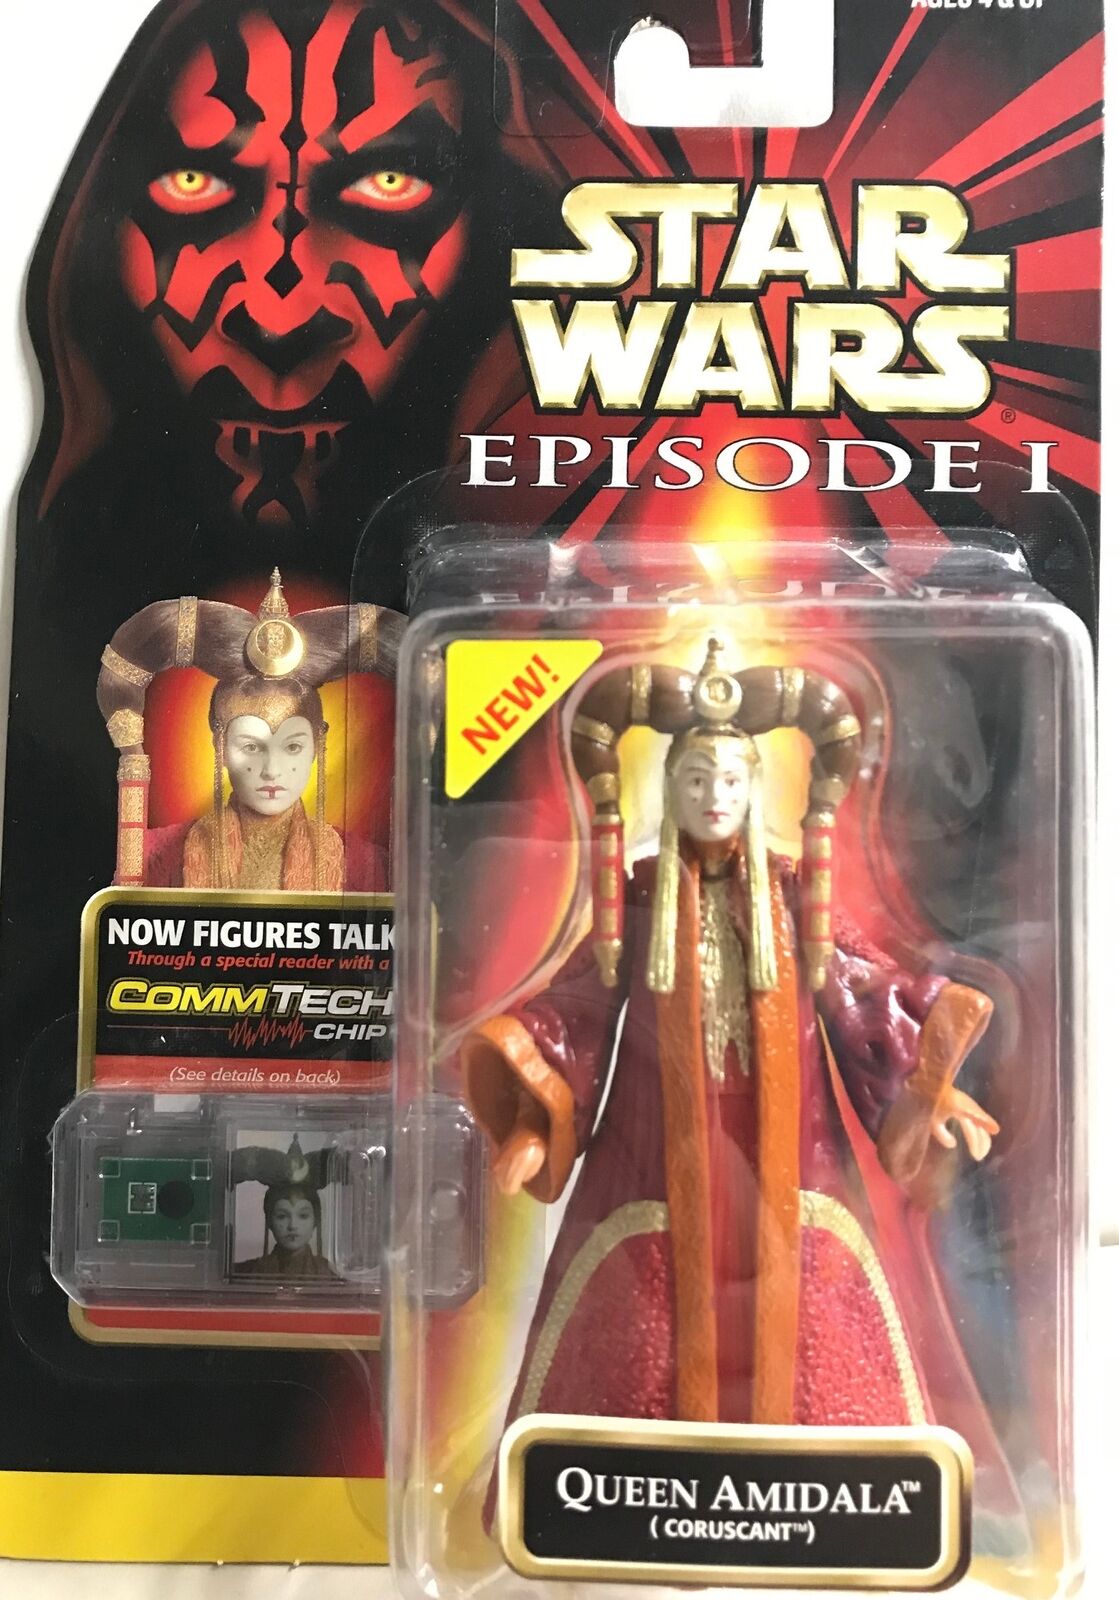 STAR WARS - HASBRO - EPISODE 1 - QUEEN AMIDALA (a) - with CommTech Chip